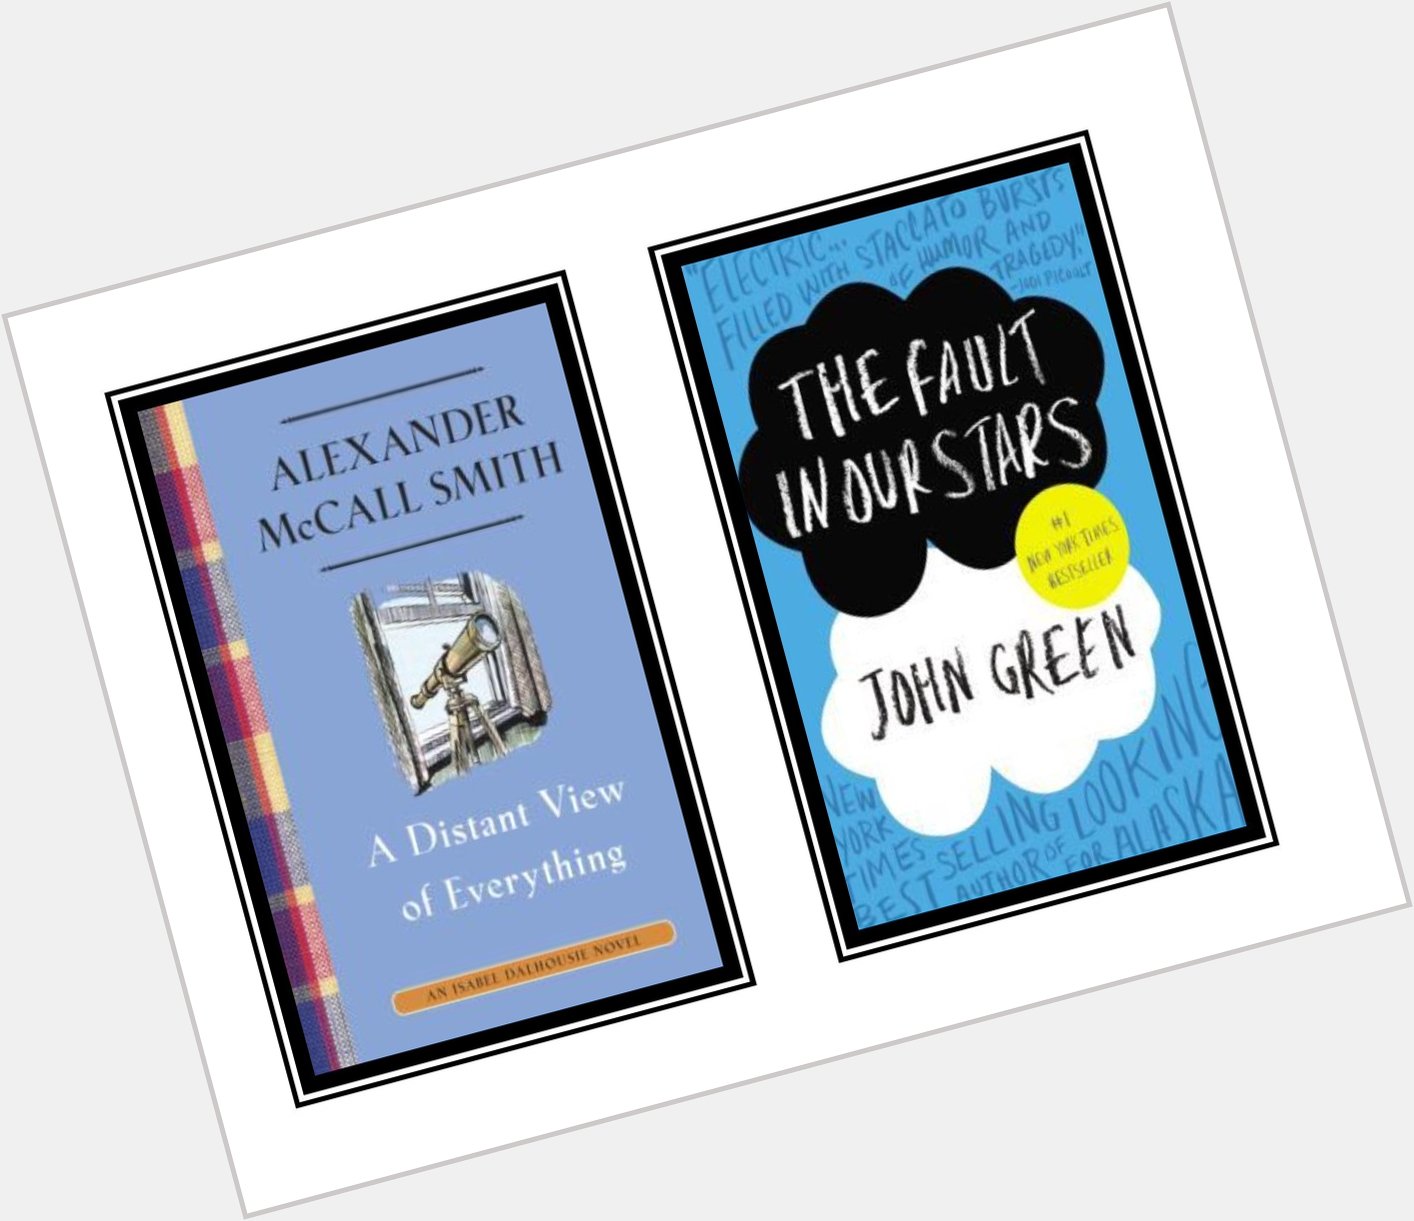 Happy birthday to authors John Green and Alexander McCall Smith! 